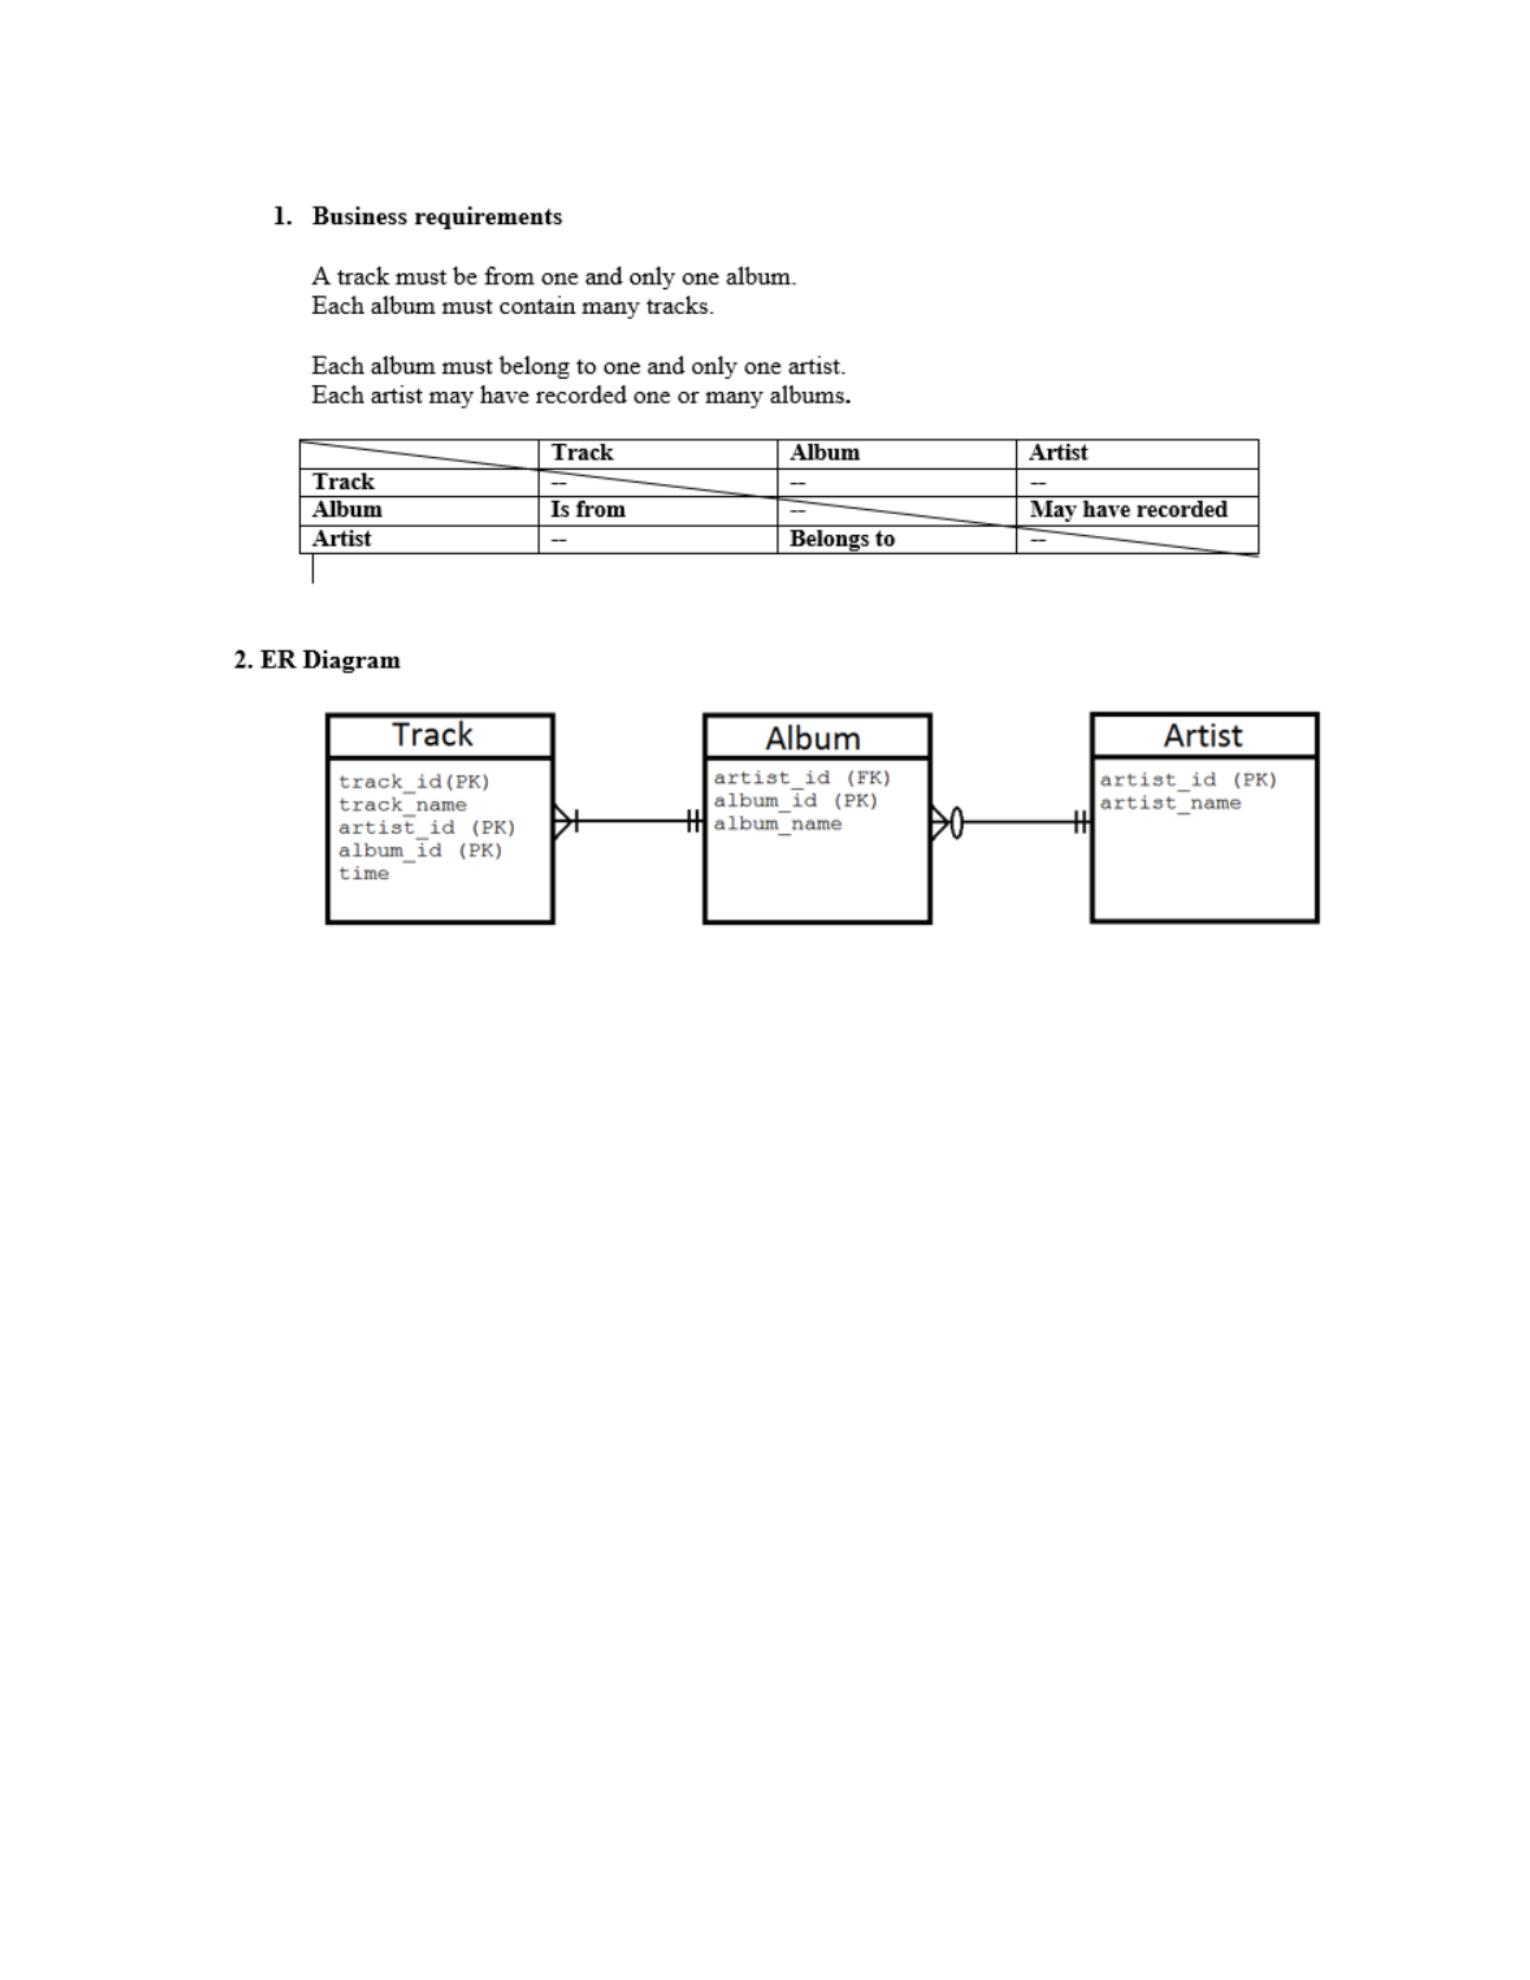 Map The Er Diagram To A Relational Database And Es pertaining to Er Diagram One And Only One